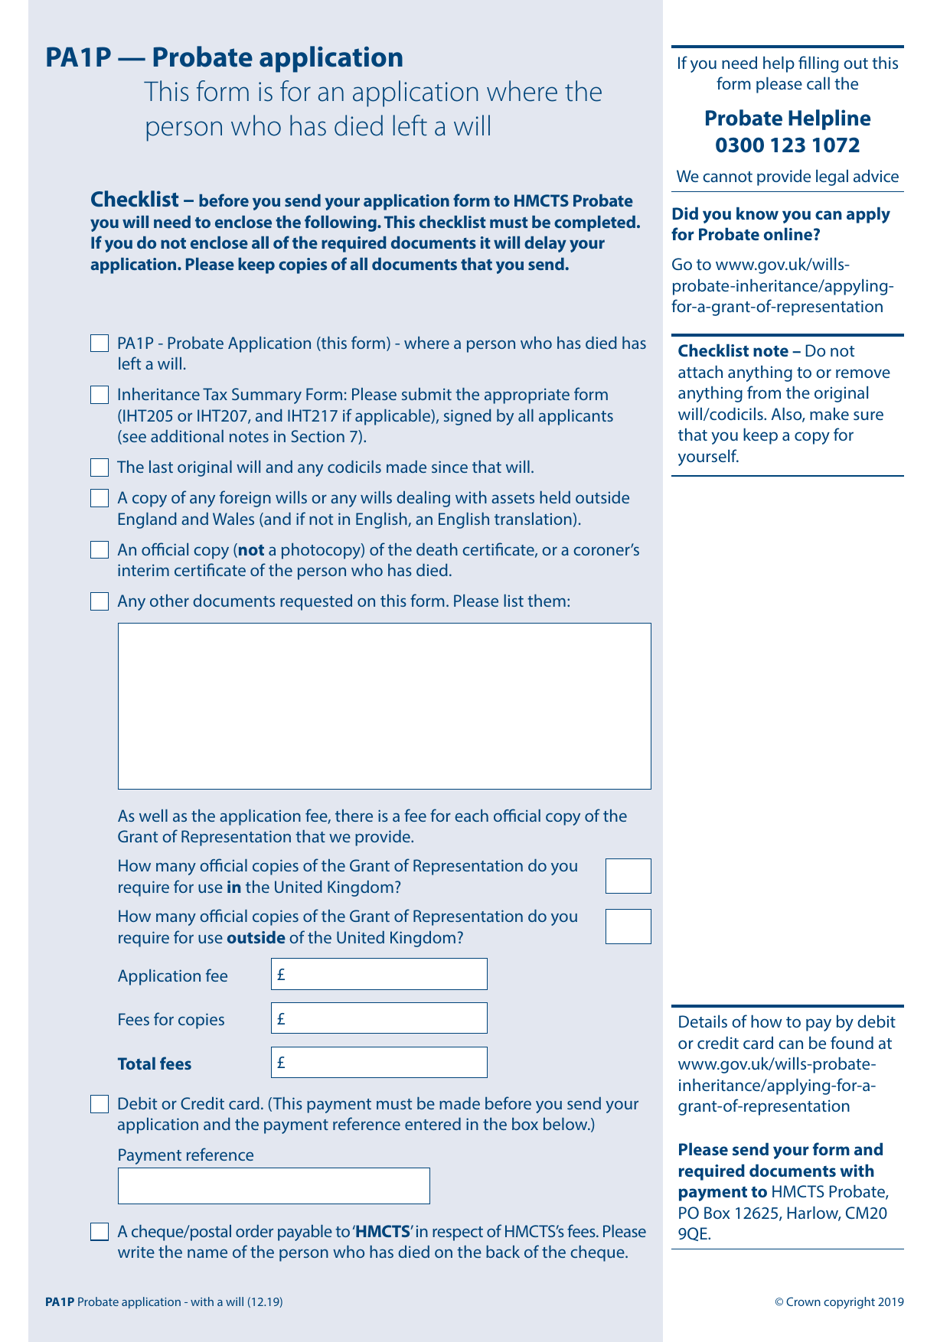 Form PA1P Probate Application (The Person Left a Will) - for Citizen Applicants Only - United Kingdom, Page 1